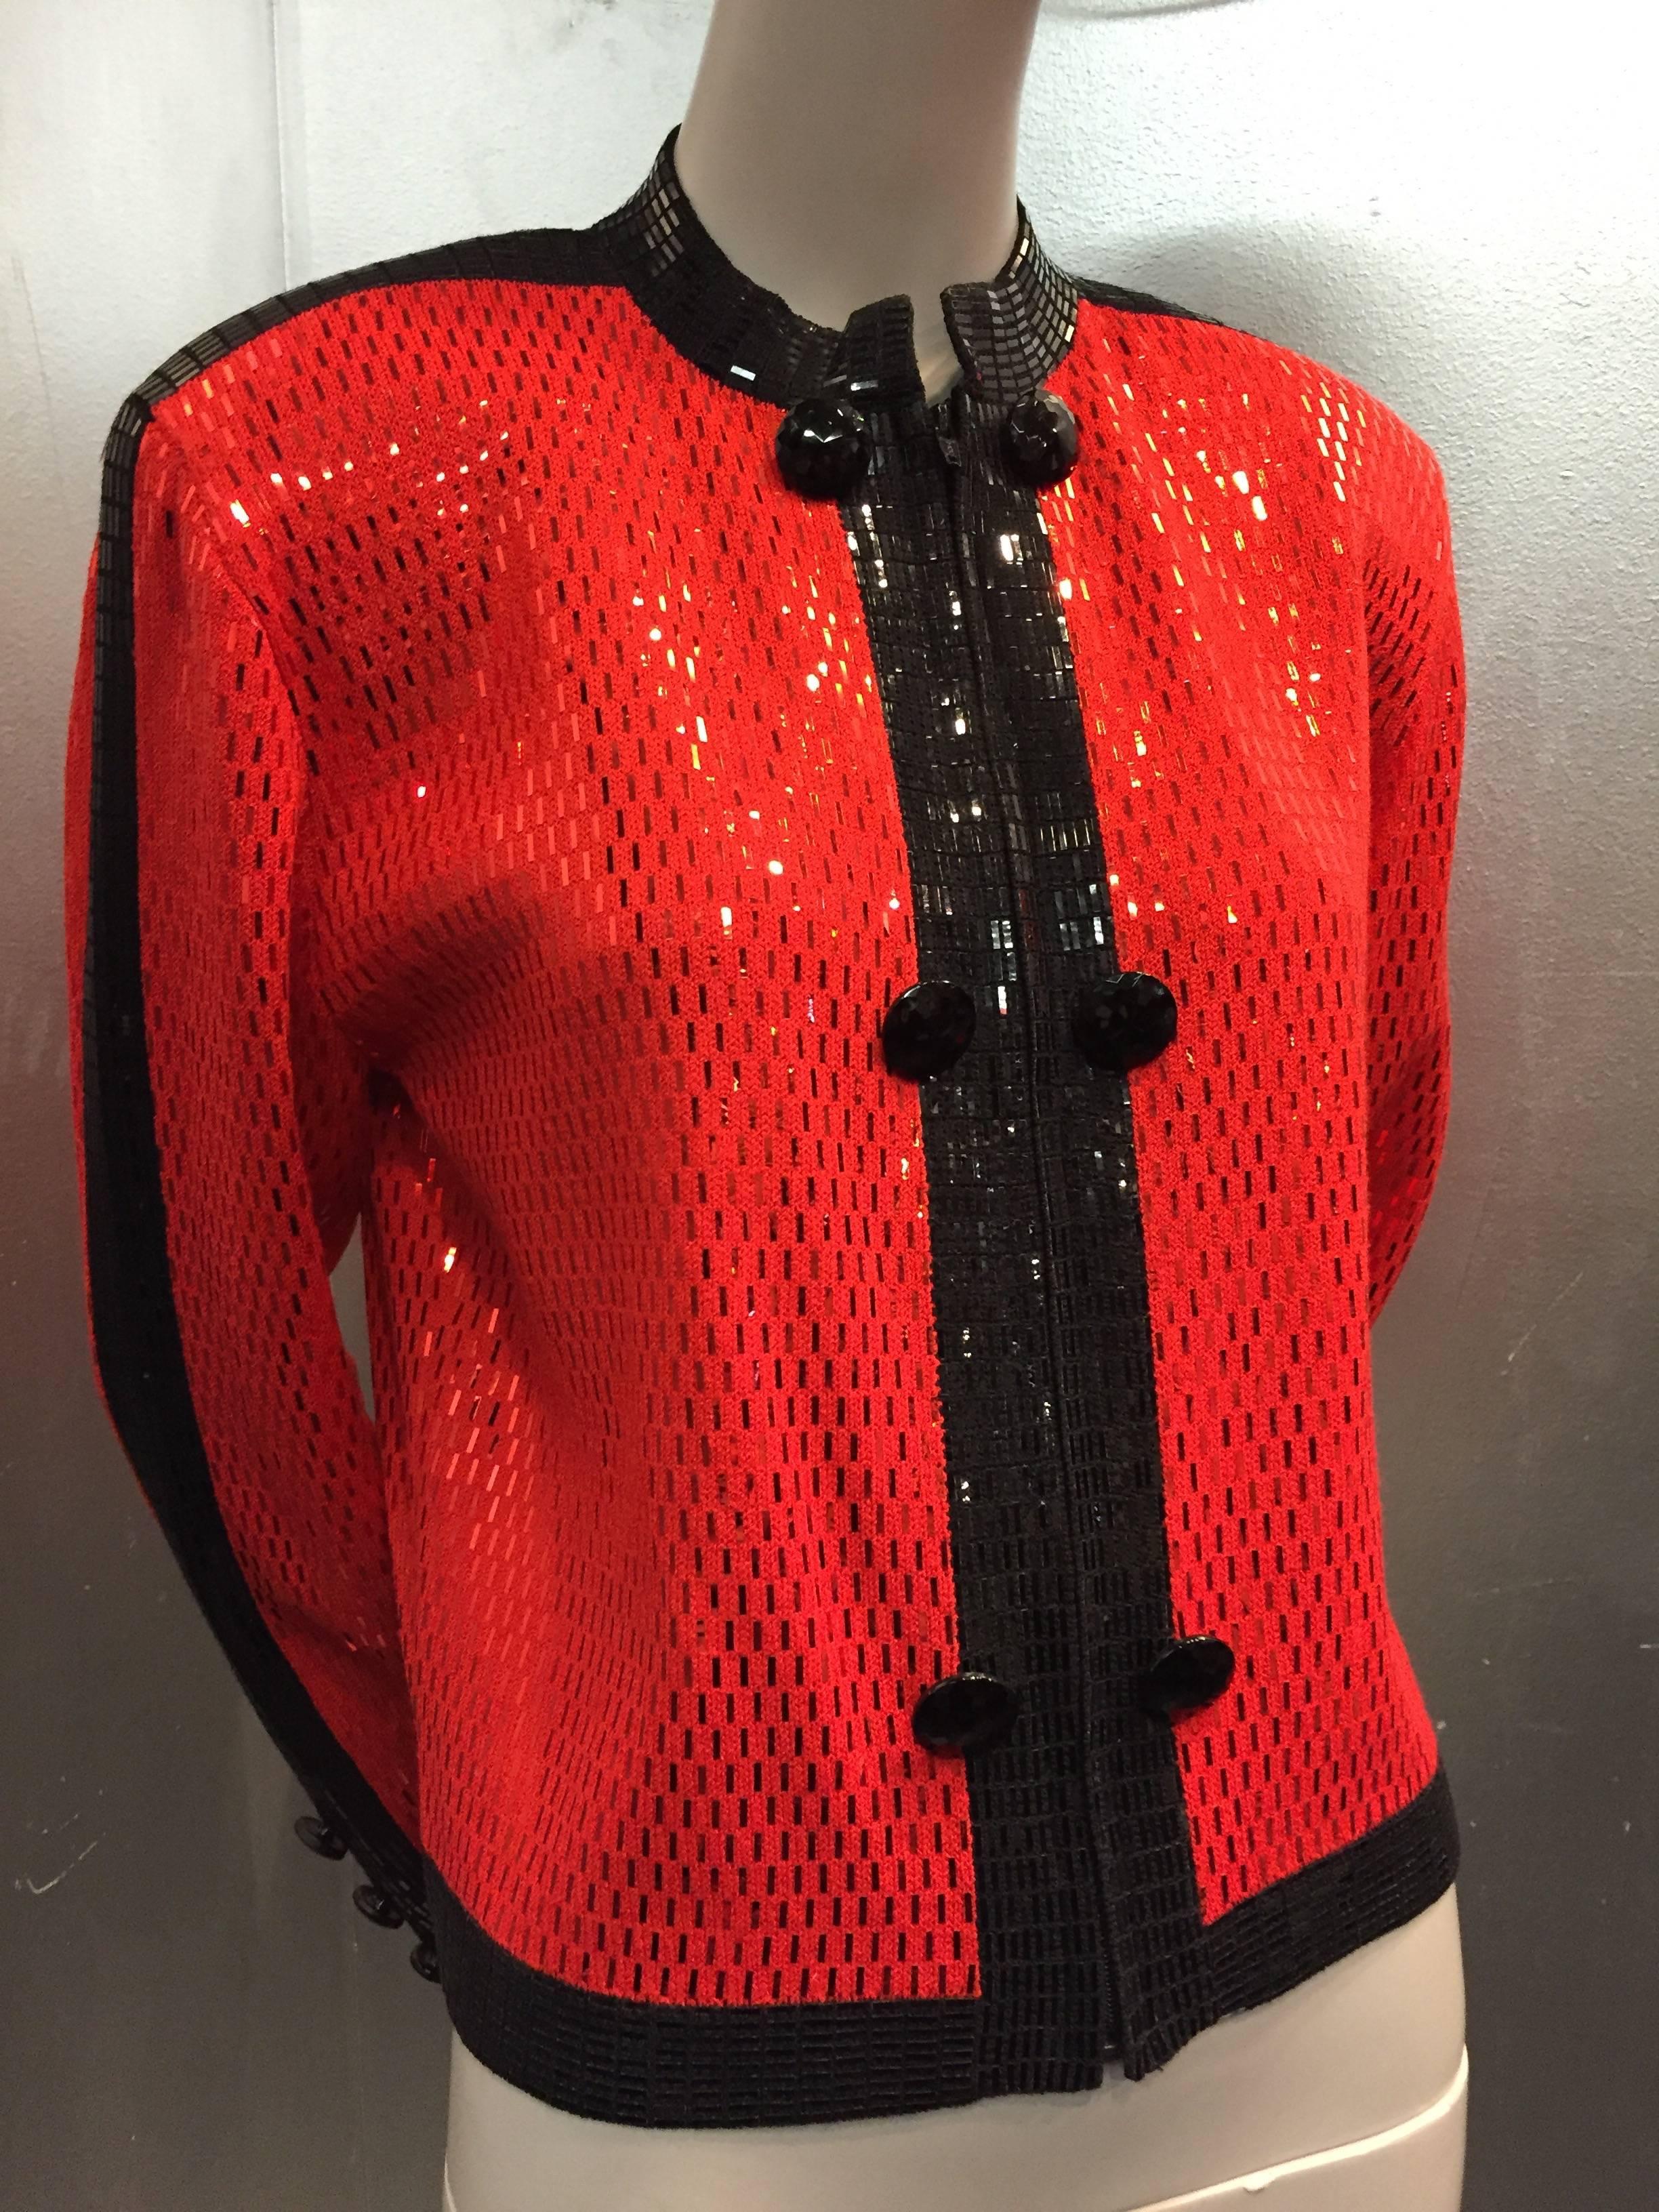 1980s St. John Evening jacket: Red and black rayon knit with zippered front.  Entirely covered in corresponding heat-set bar sequins.  Black plastic faceted buttons at front and sleeve cuffs. Unlined. 